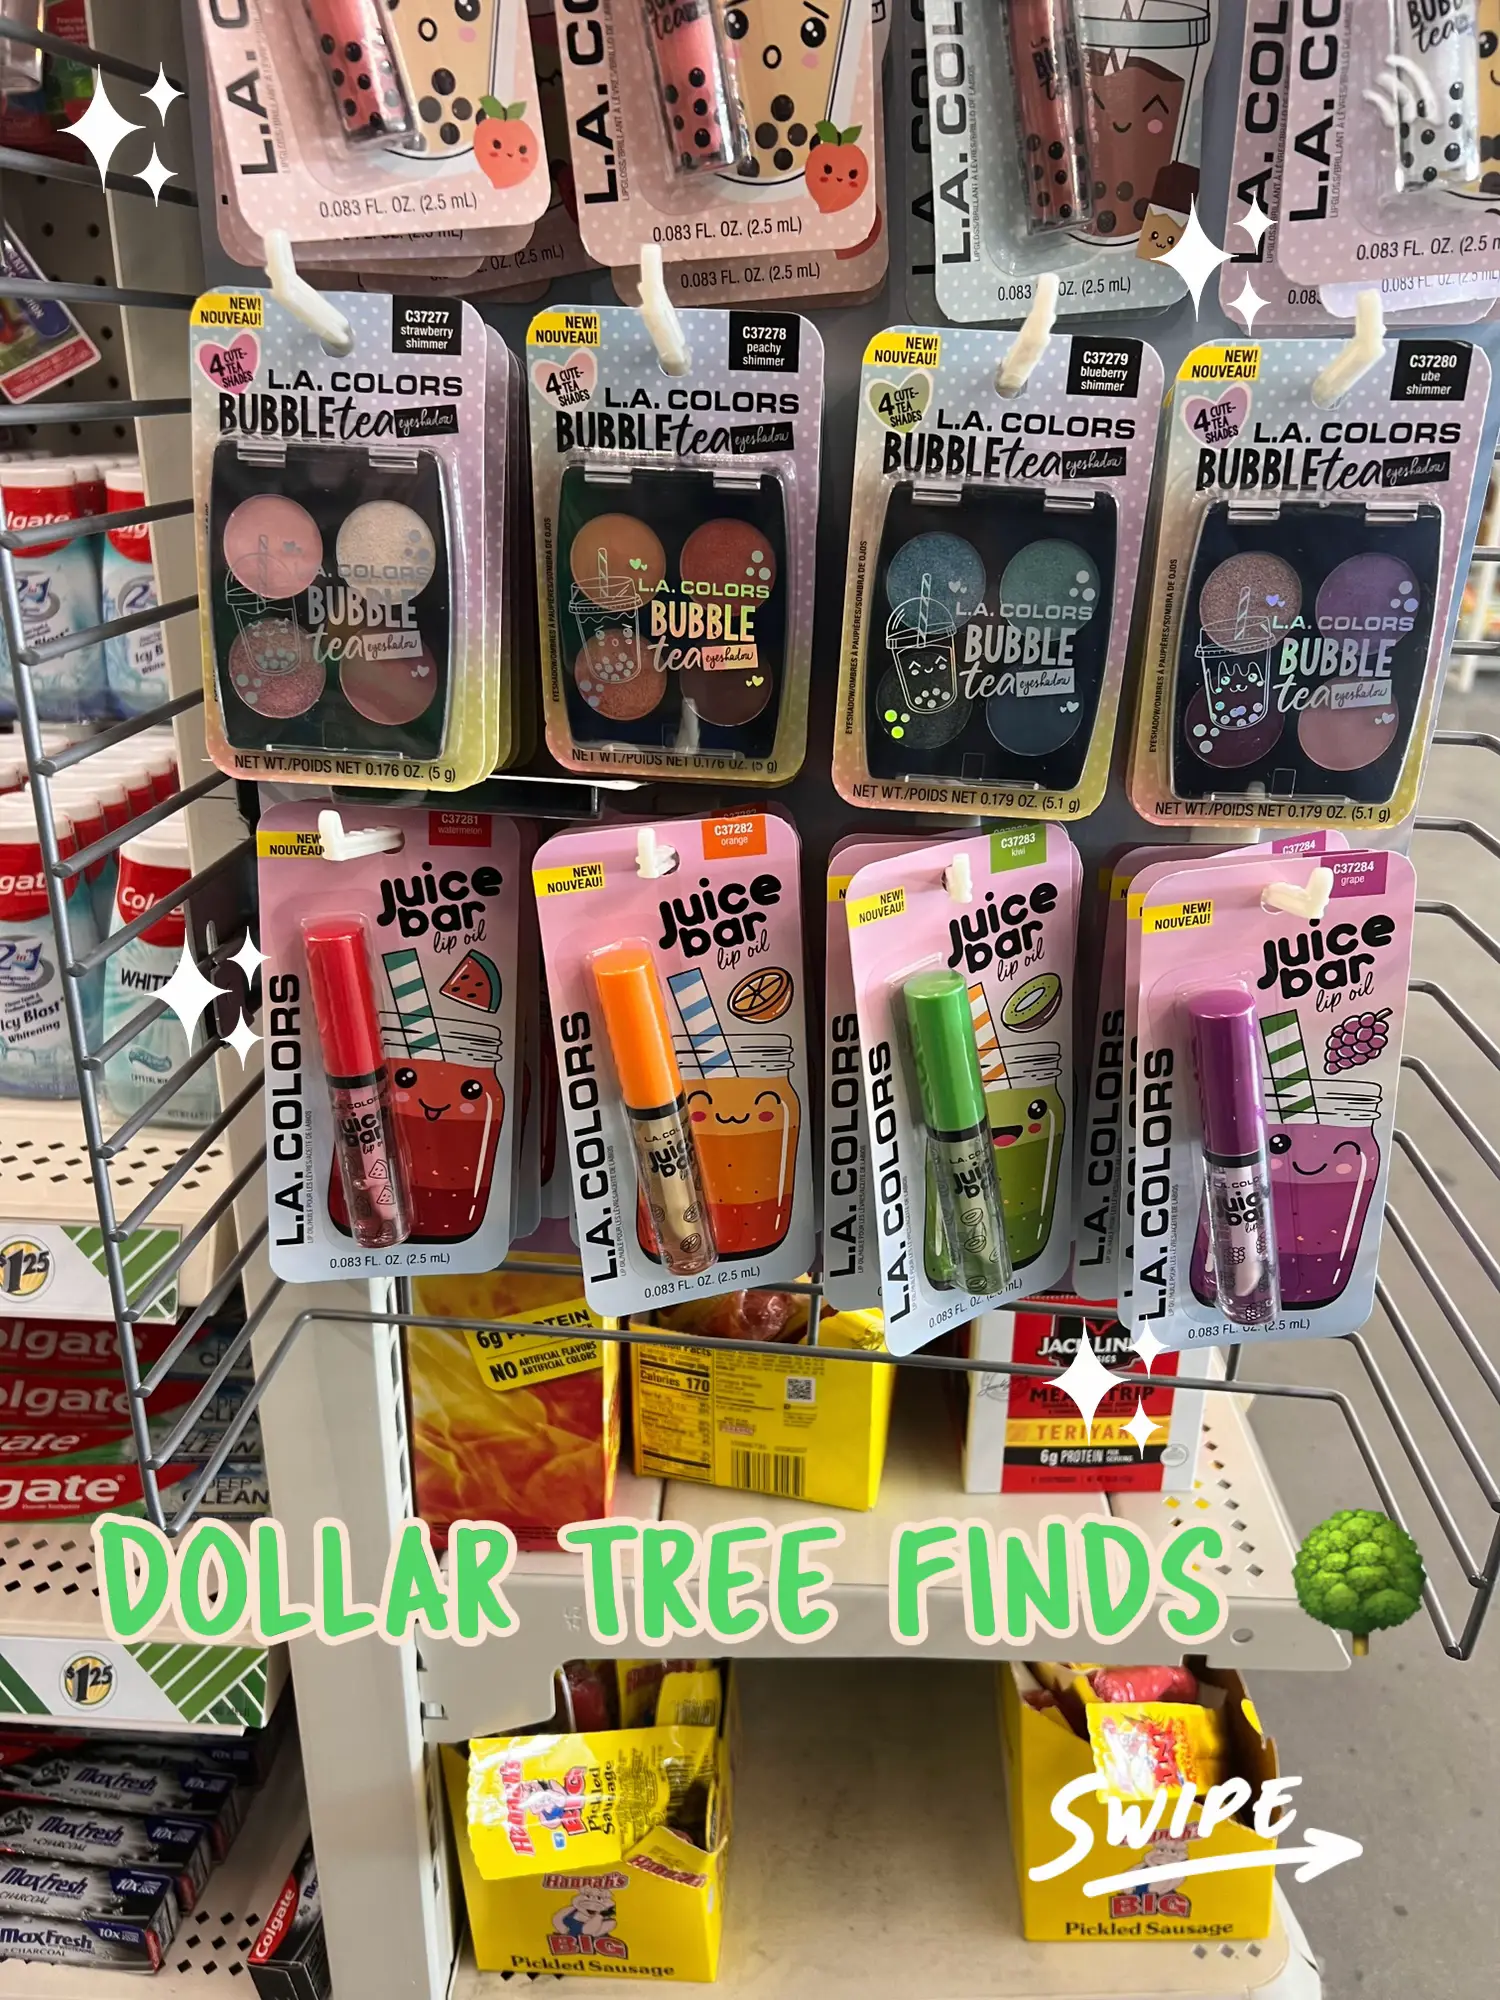 New Drink Finds at Dollar Store - Lemon8 Search